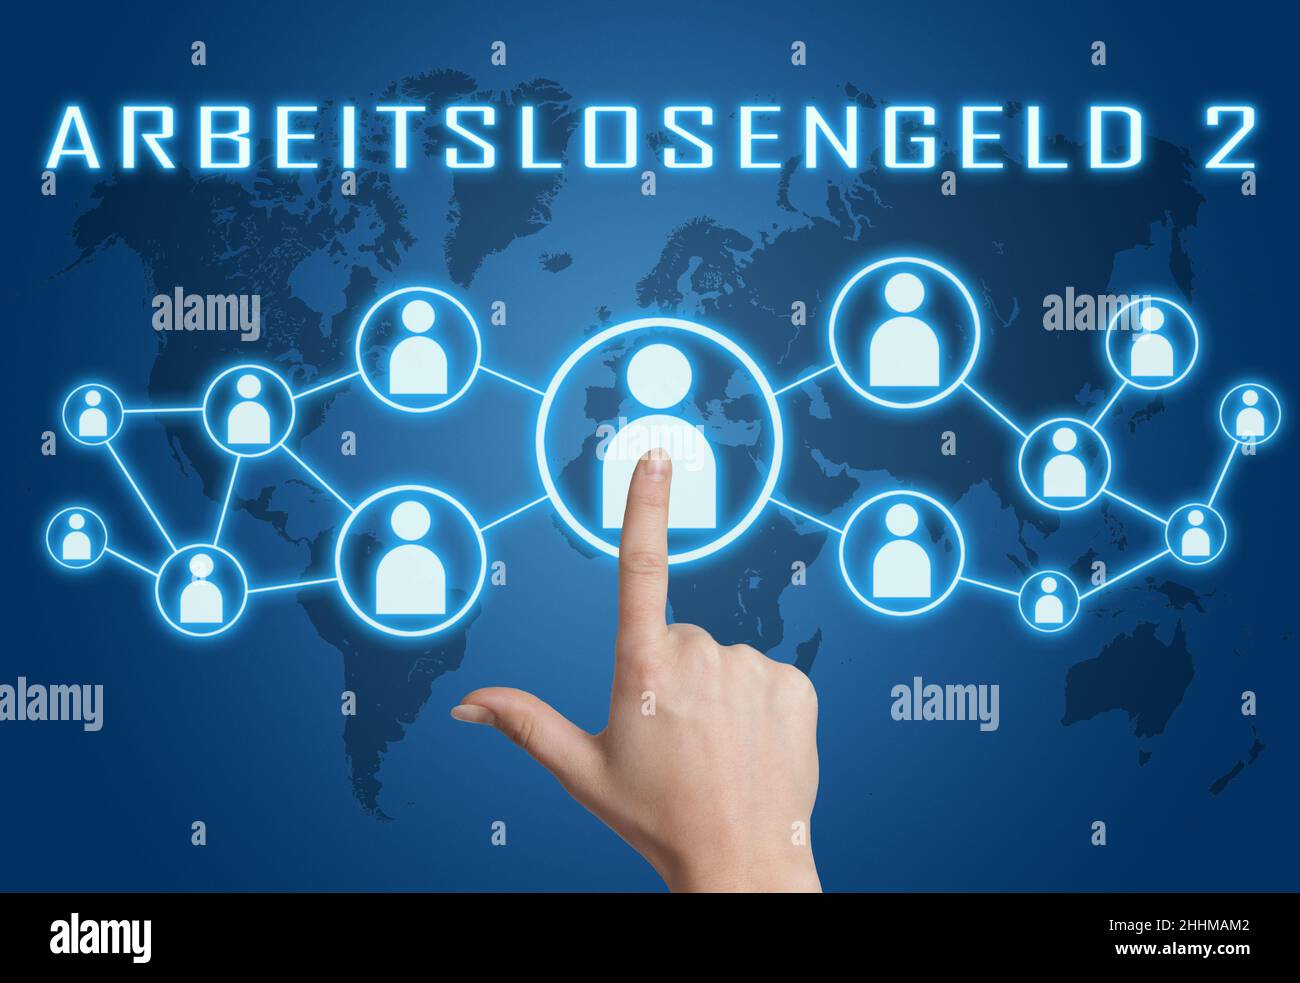 Arbeitslosengeld 2 - german word for unemployment benefit or dole money - text concept with hand pressing social icons on blue world map background. Stock Photo